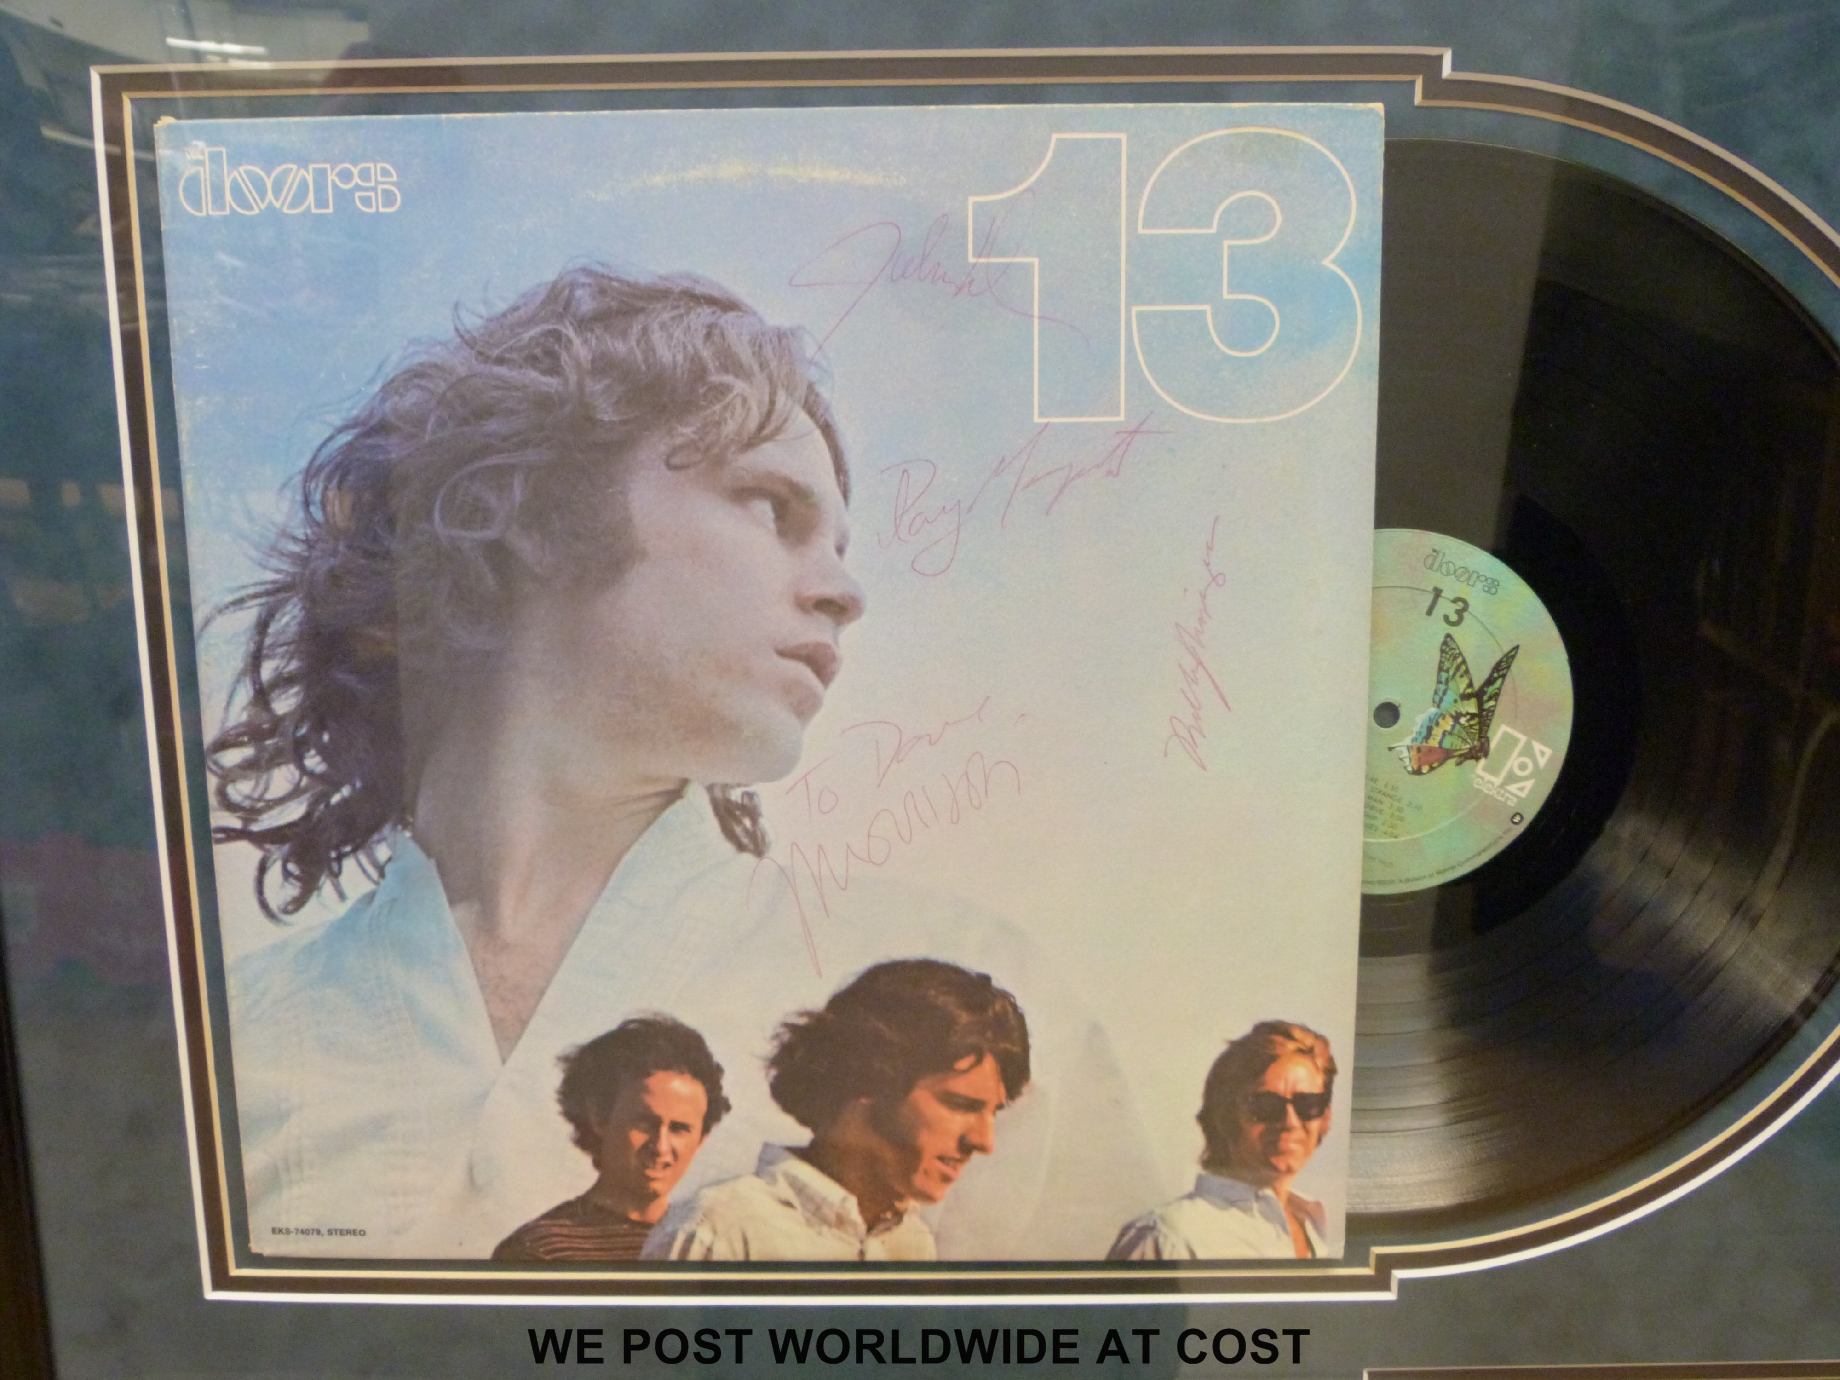 An autographed montage of the Doors album 13. - Image 2 of 2